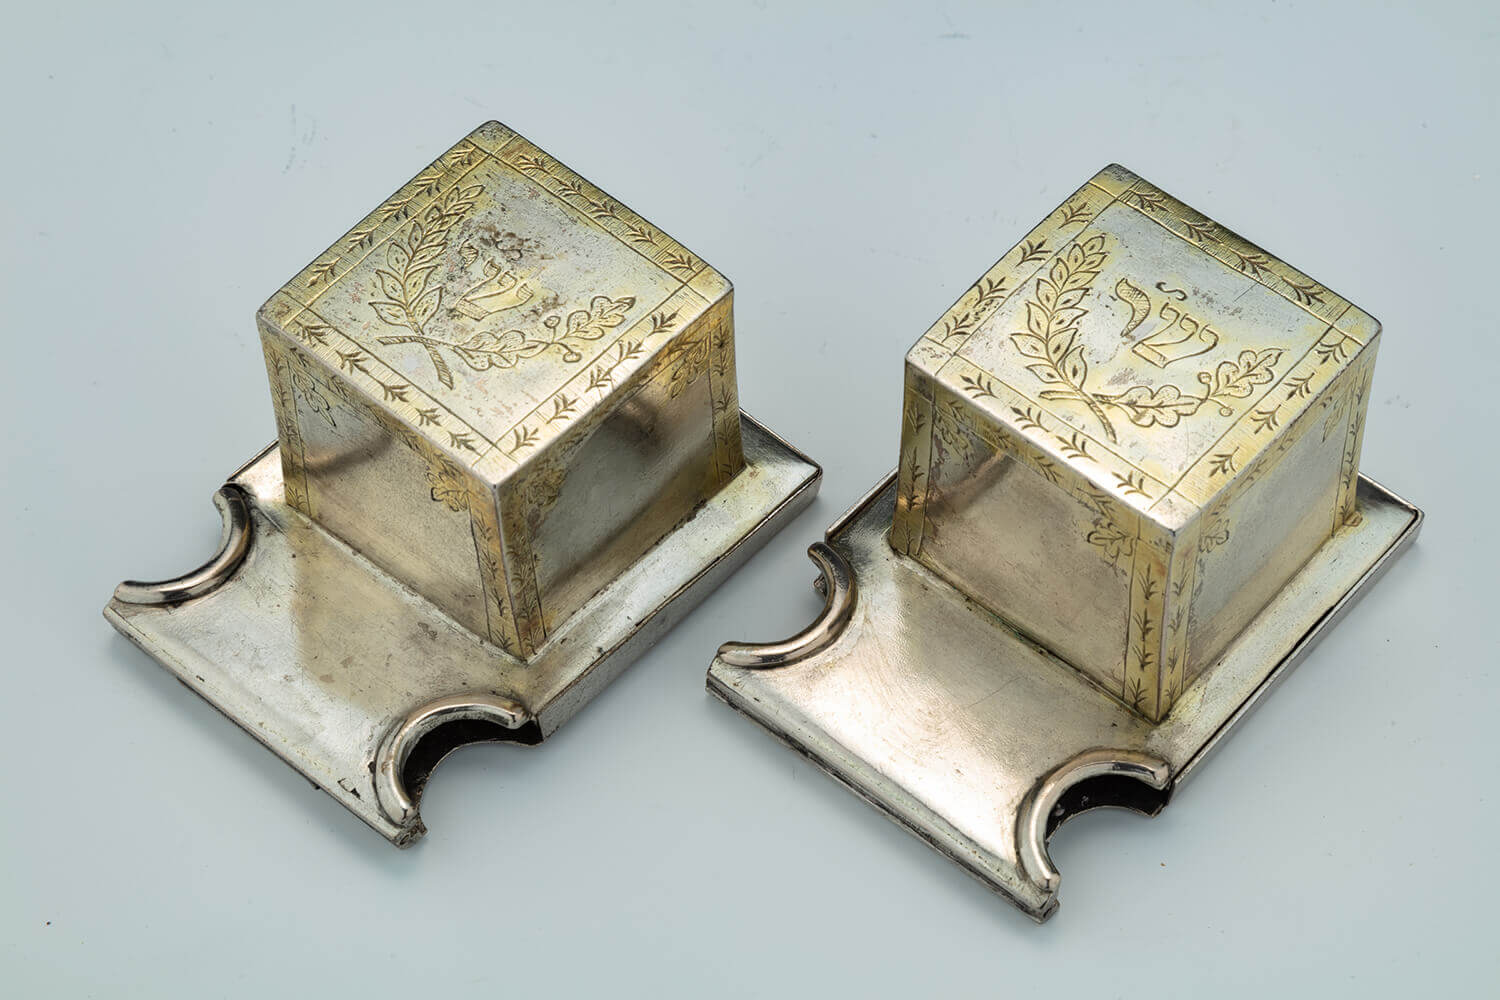 131. A PAIR OF SILVER TEFILLIN COVERS